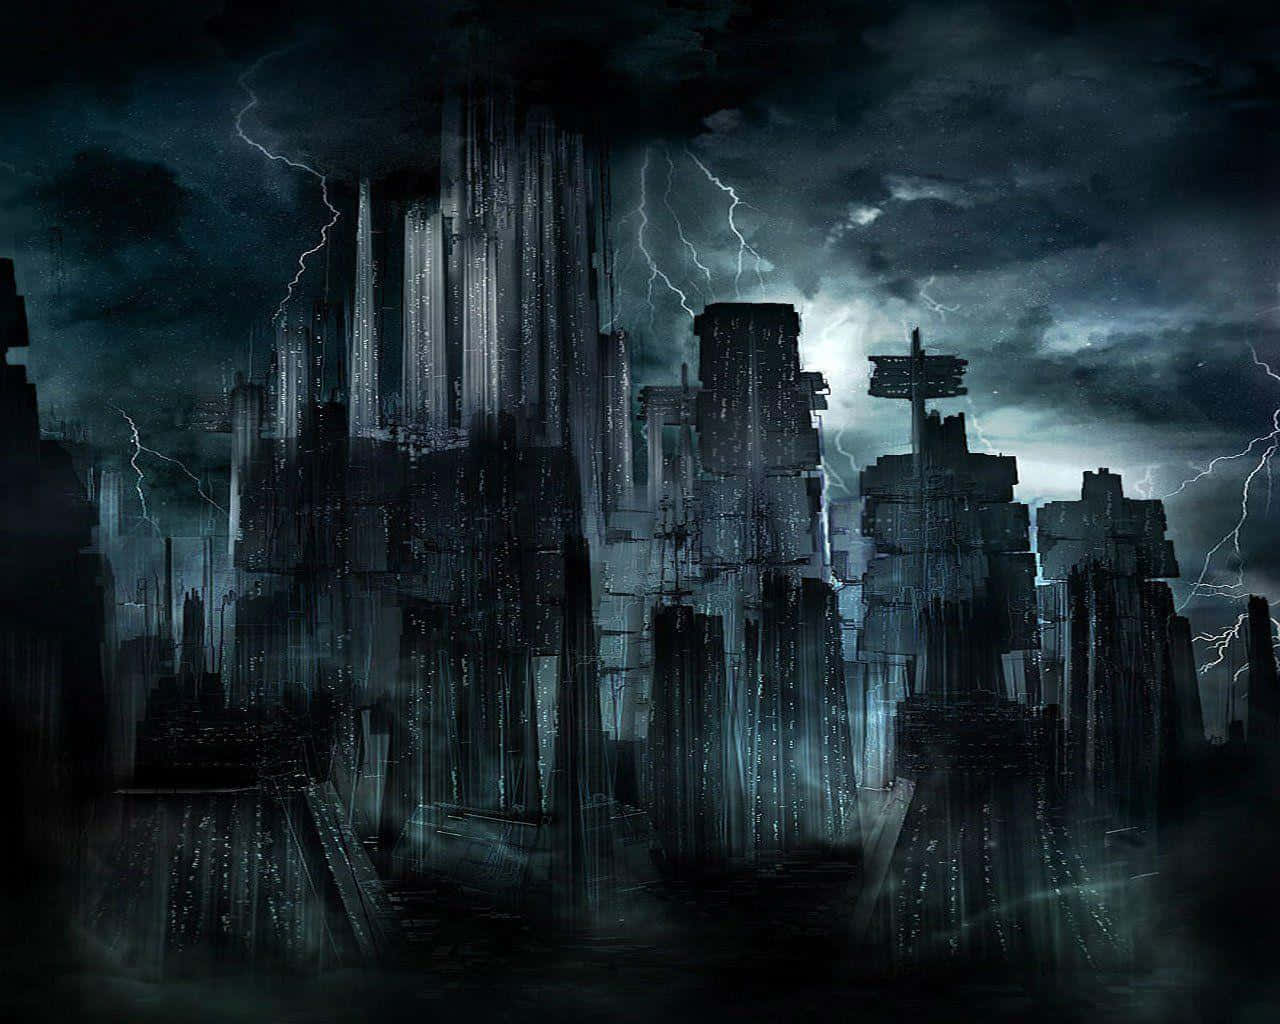 A Stunning Picture of a Dark City at Night